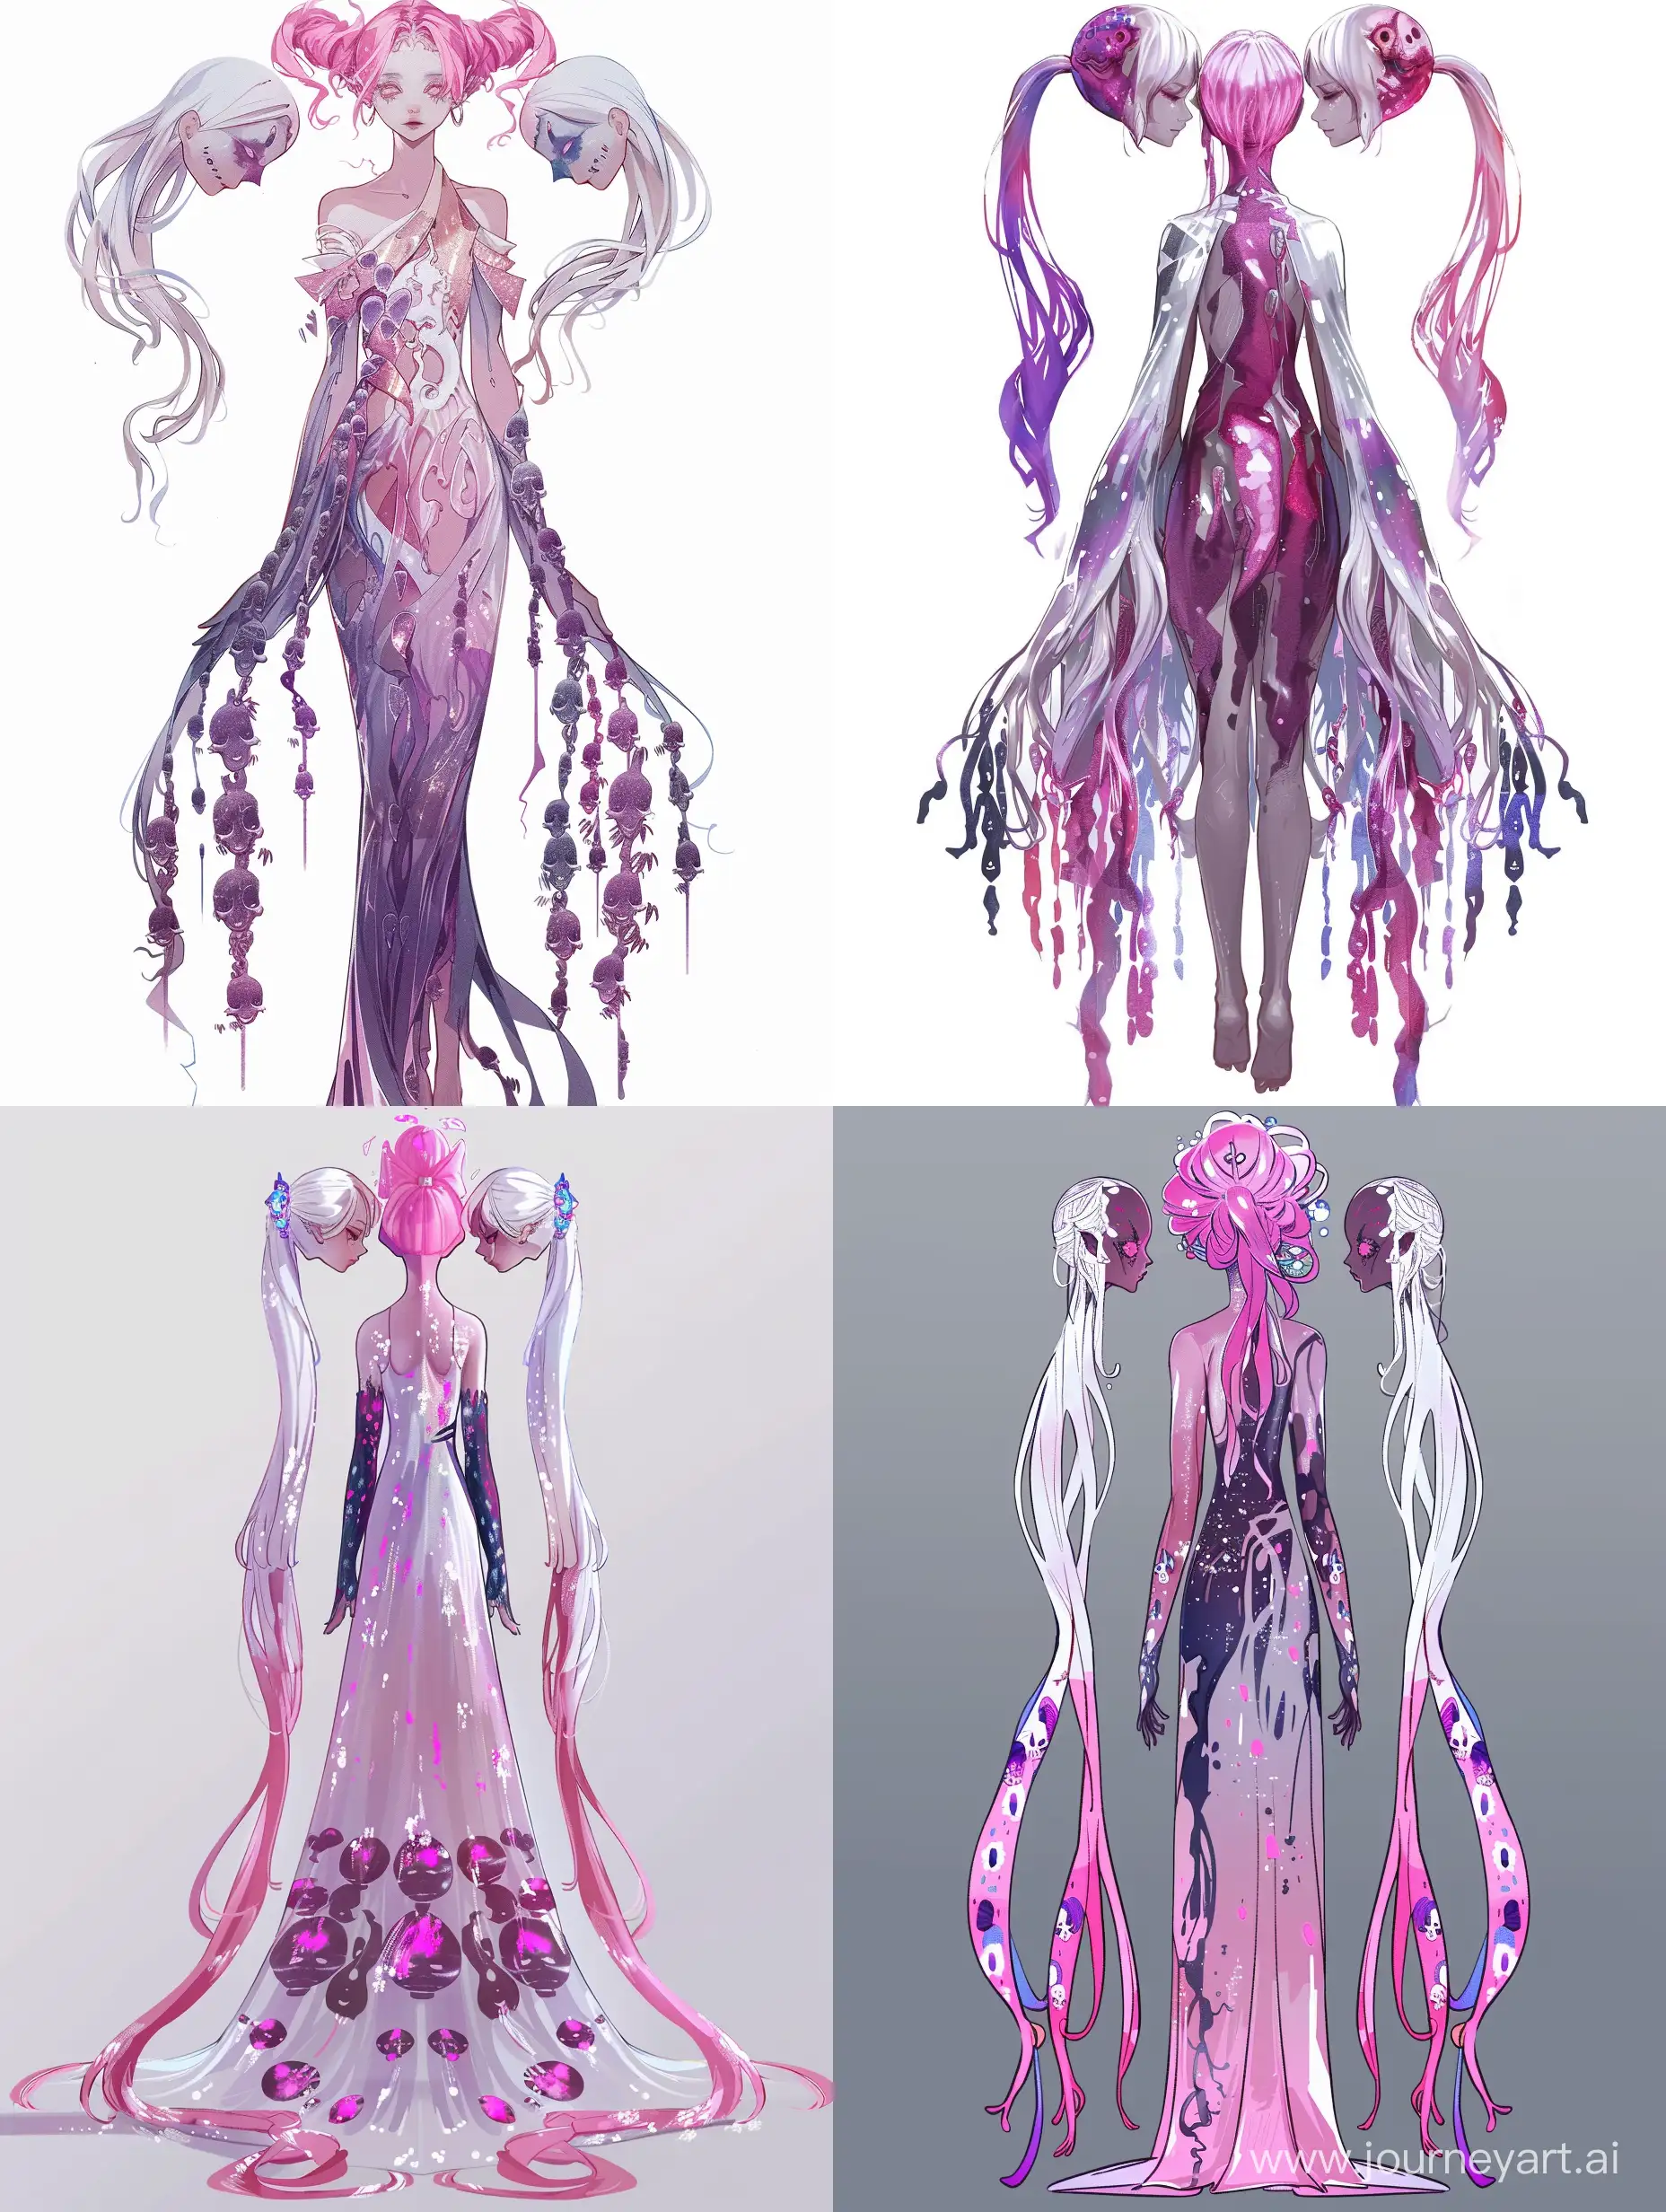 Made in a good-looking creative art style, semi-realism, or anime. With horror motifs.

Create an OC with : pink, purple, white color pallet. She has one body, but three twin heads sharing one neck, like Siamese twins, tall, wears a semi-transparent shiny dress with many prints in the shape of spirits-like faces at the end. One head has pink hair, the second head has white hair, the third head has purple hair.